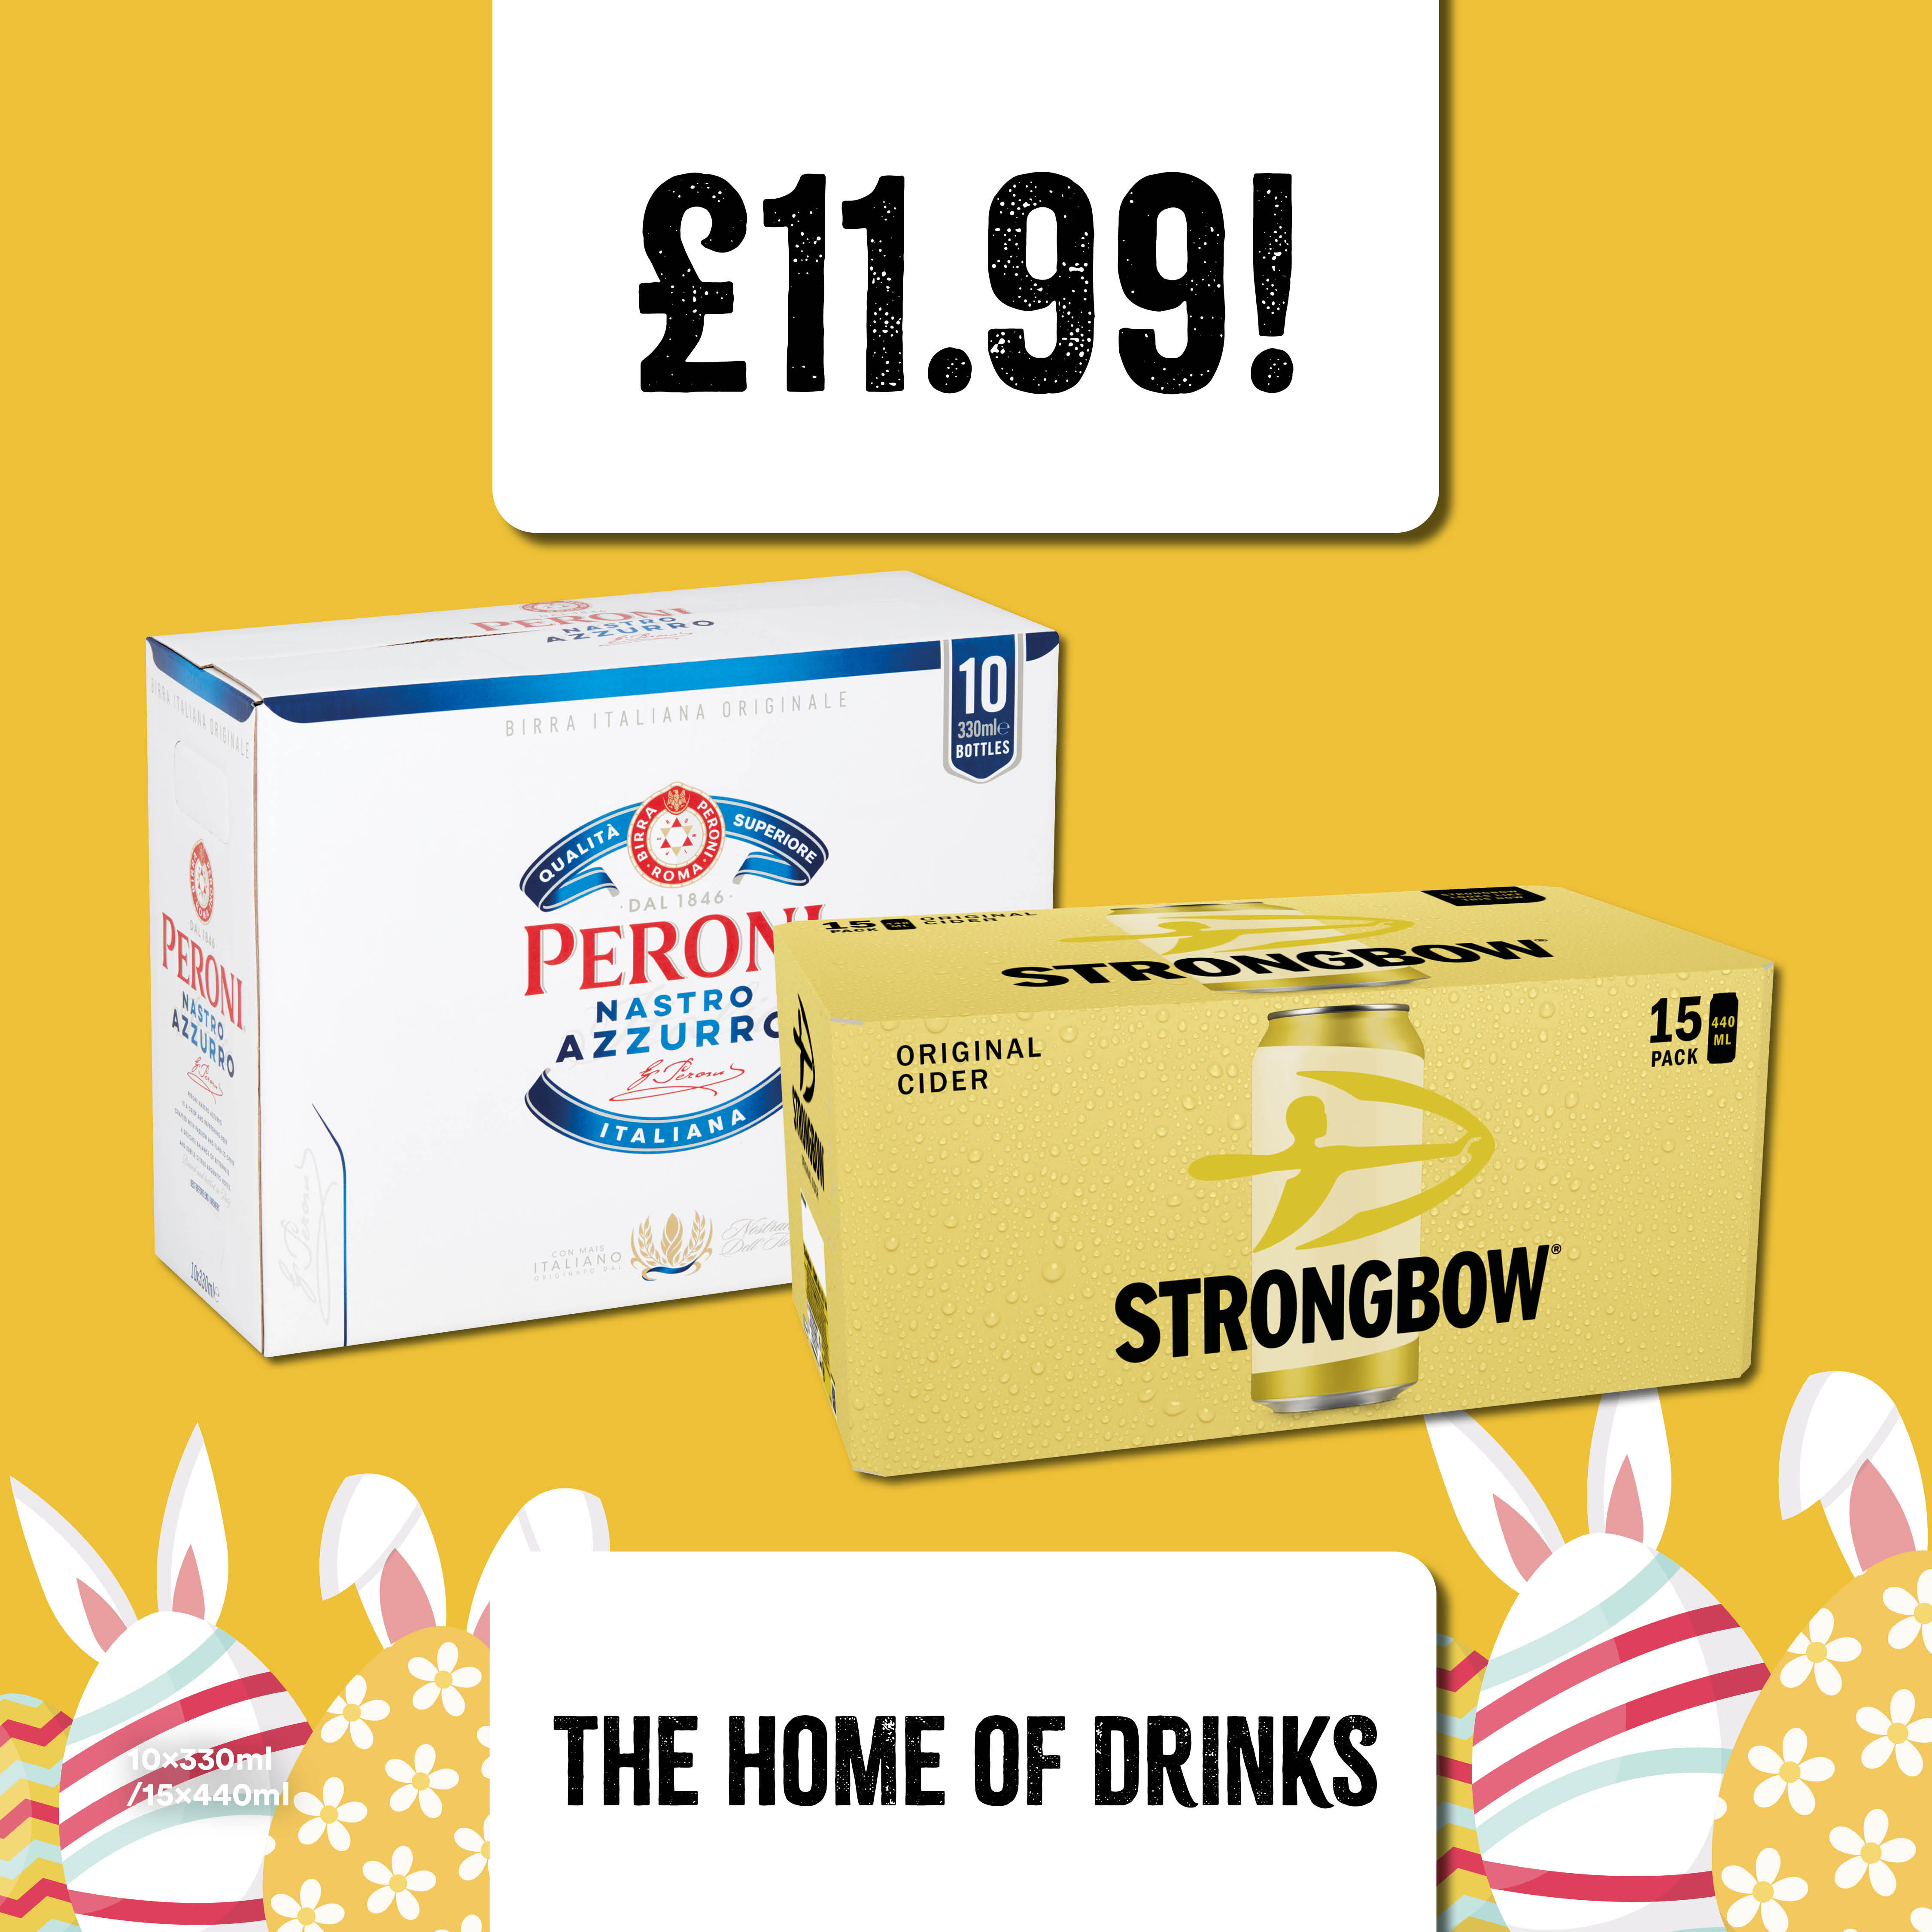 £11.99 - Peroni 10 x 330ml and Strongbow 15 x 440ml Bargain Booze Select Convenience Fleetwood 01253 283780